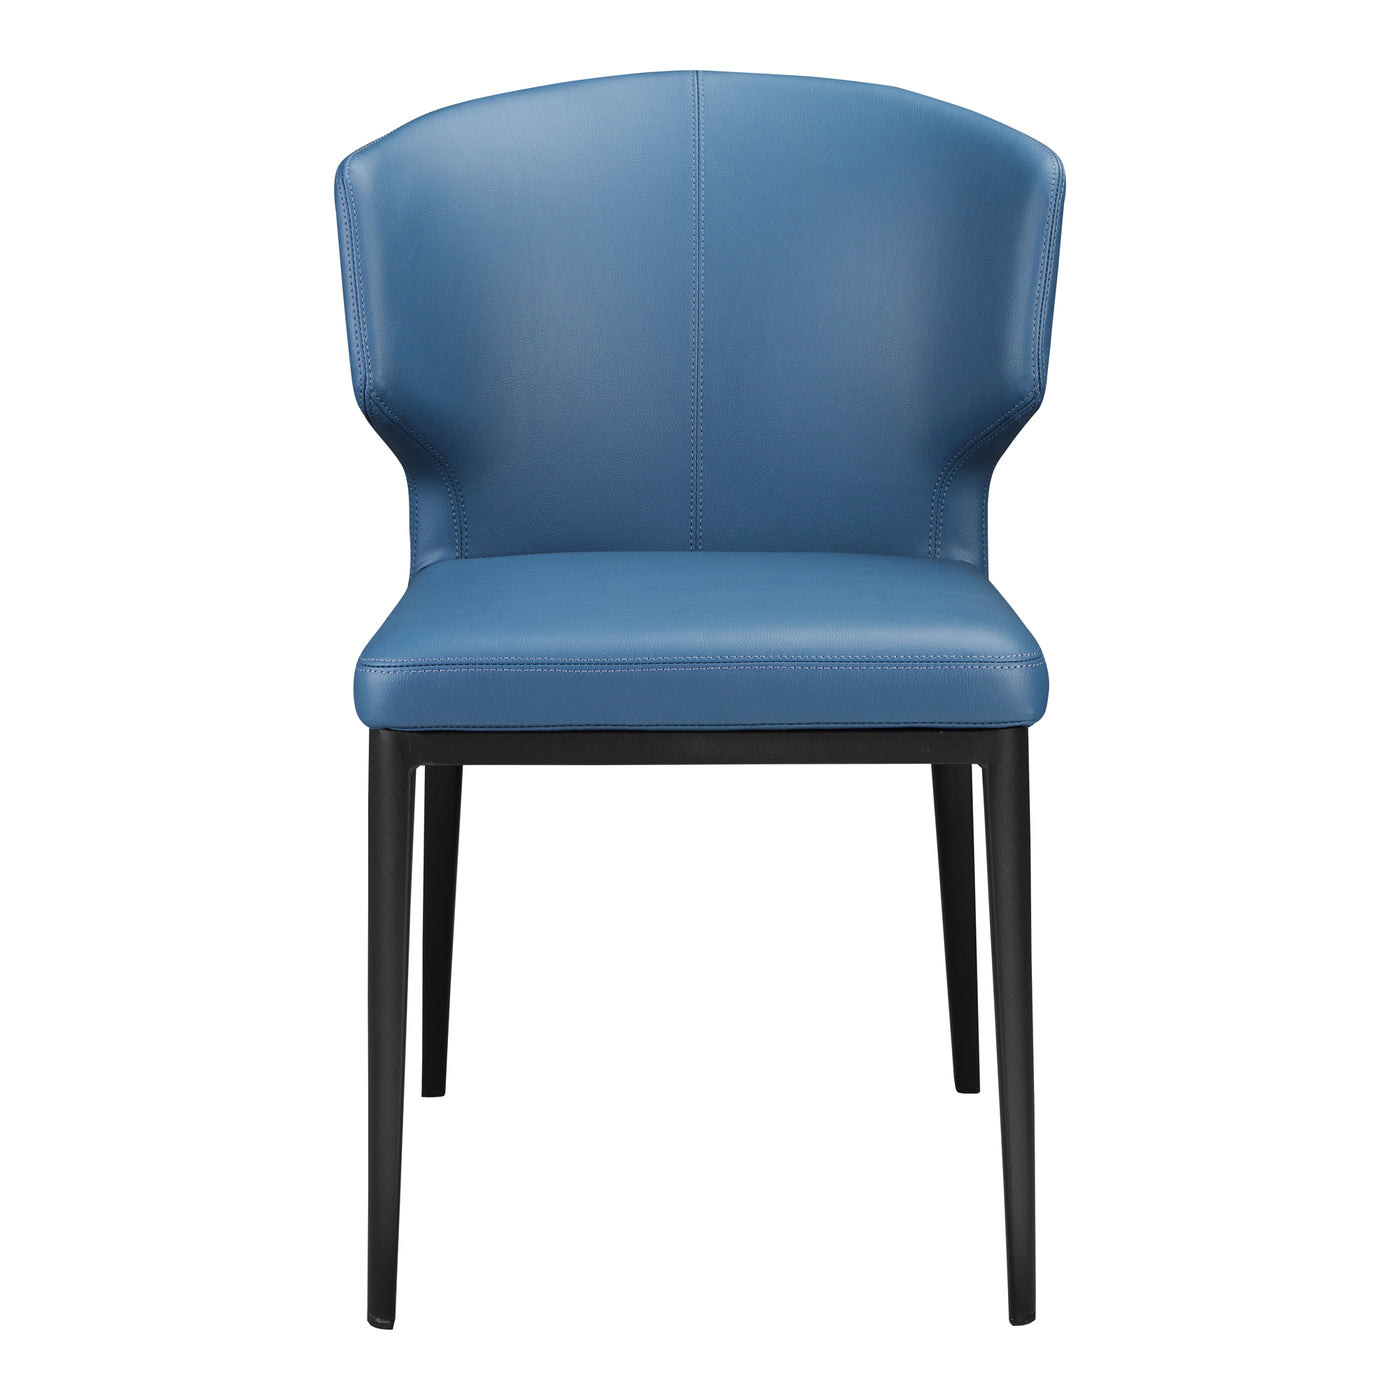 The well-tailored Delaney Side Chair makes a perfect seating for your contemporary home. Its comfortbale, easy to care uph...